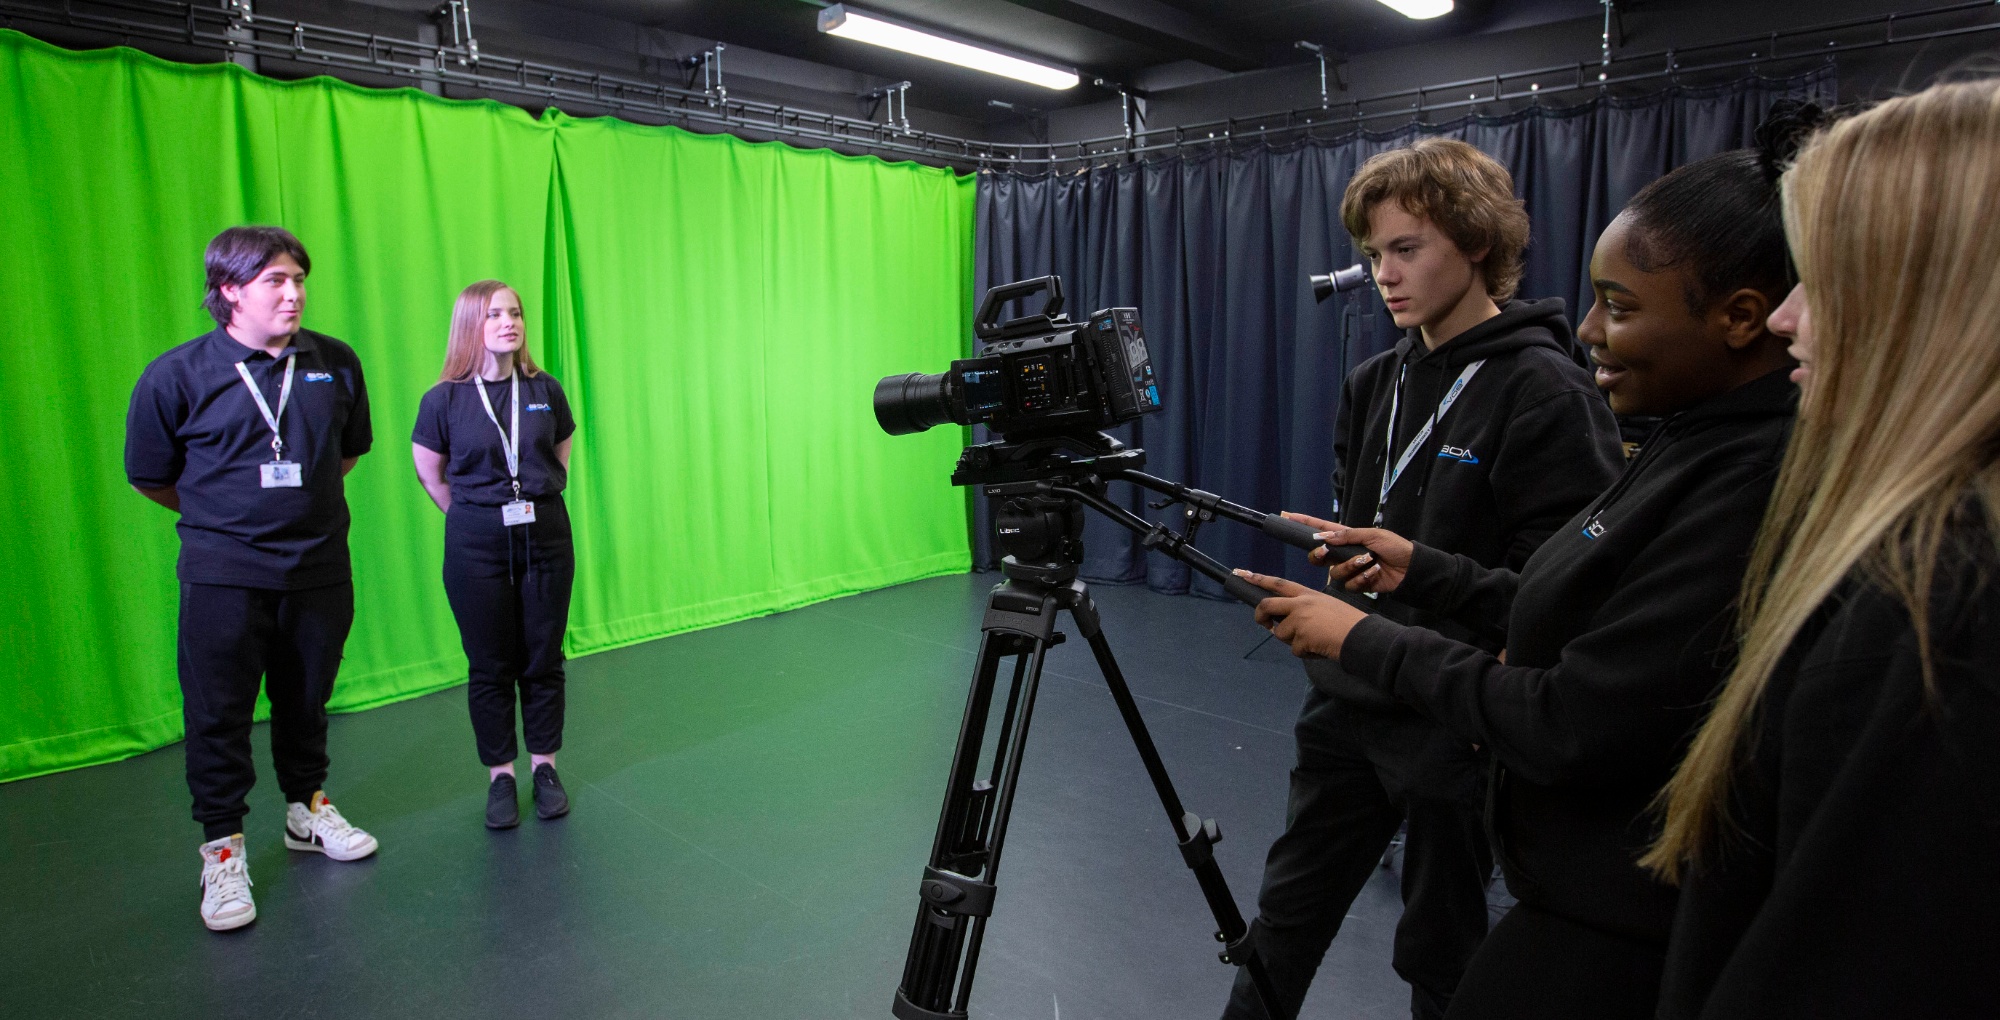 Students filming in Green Screen studio with camera on a tripod